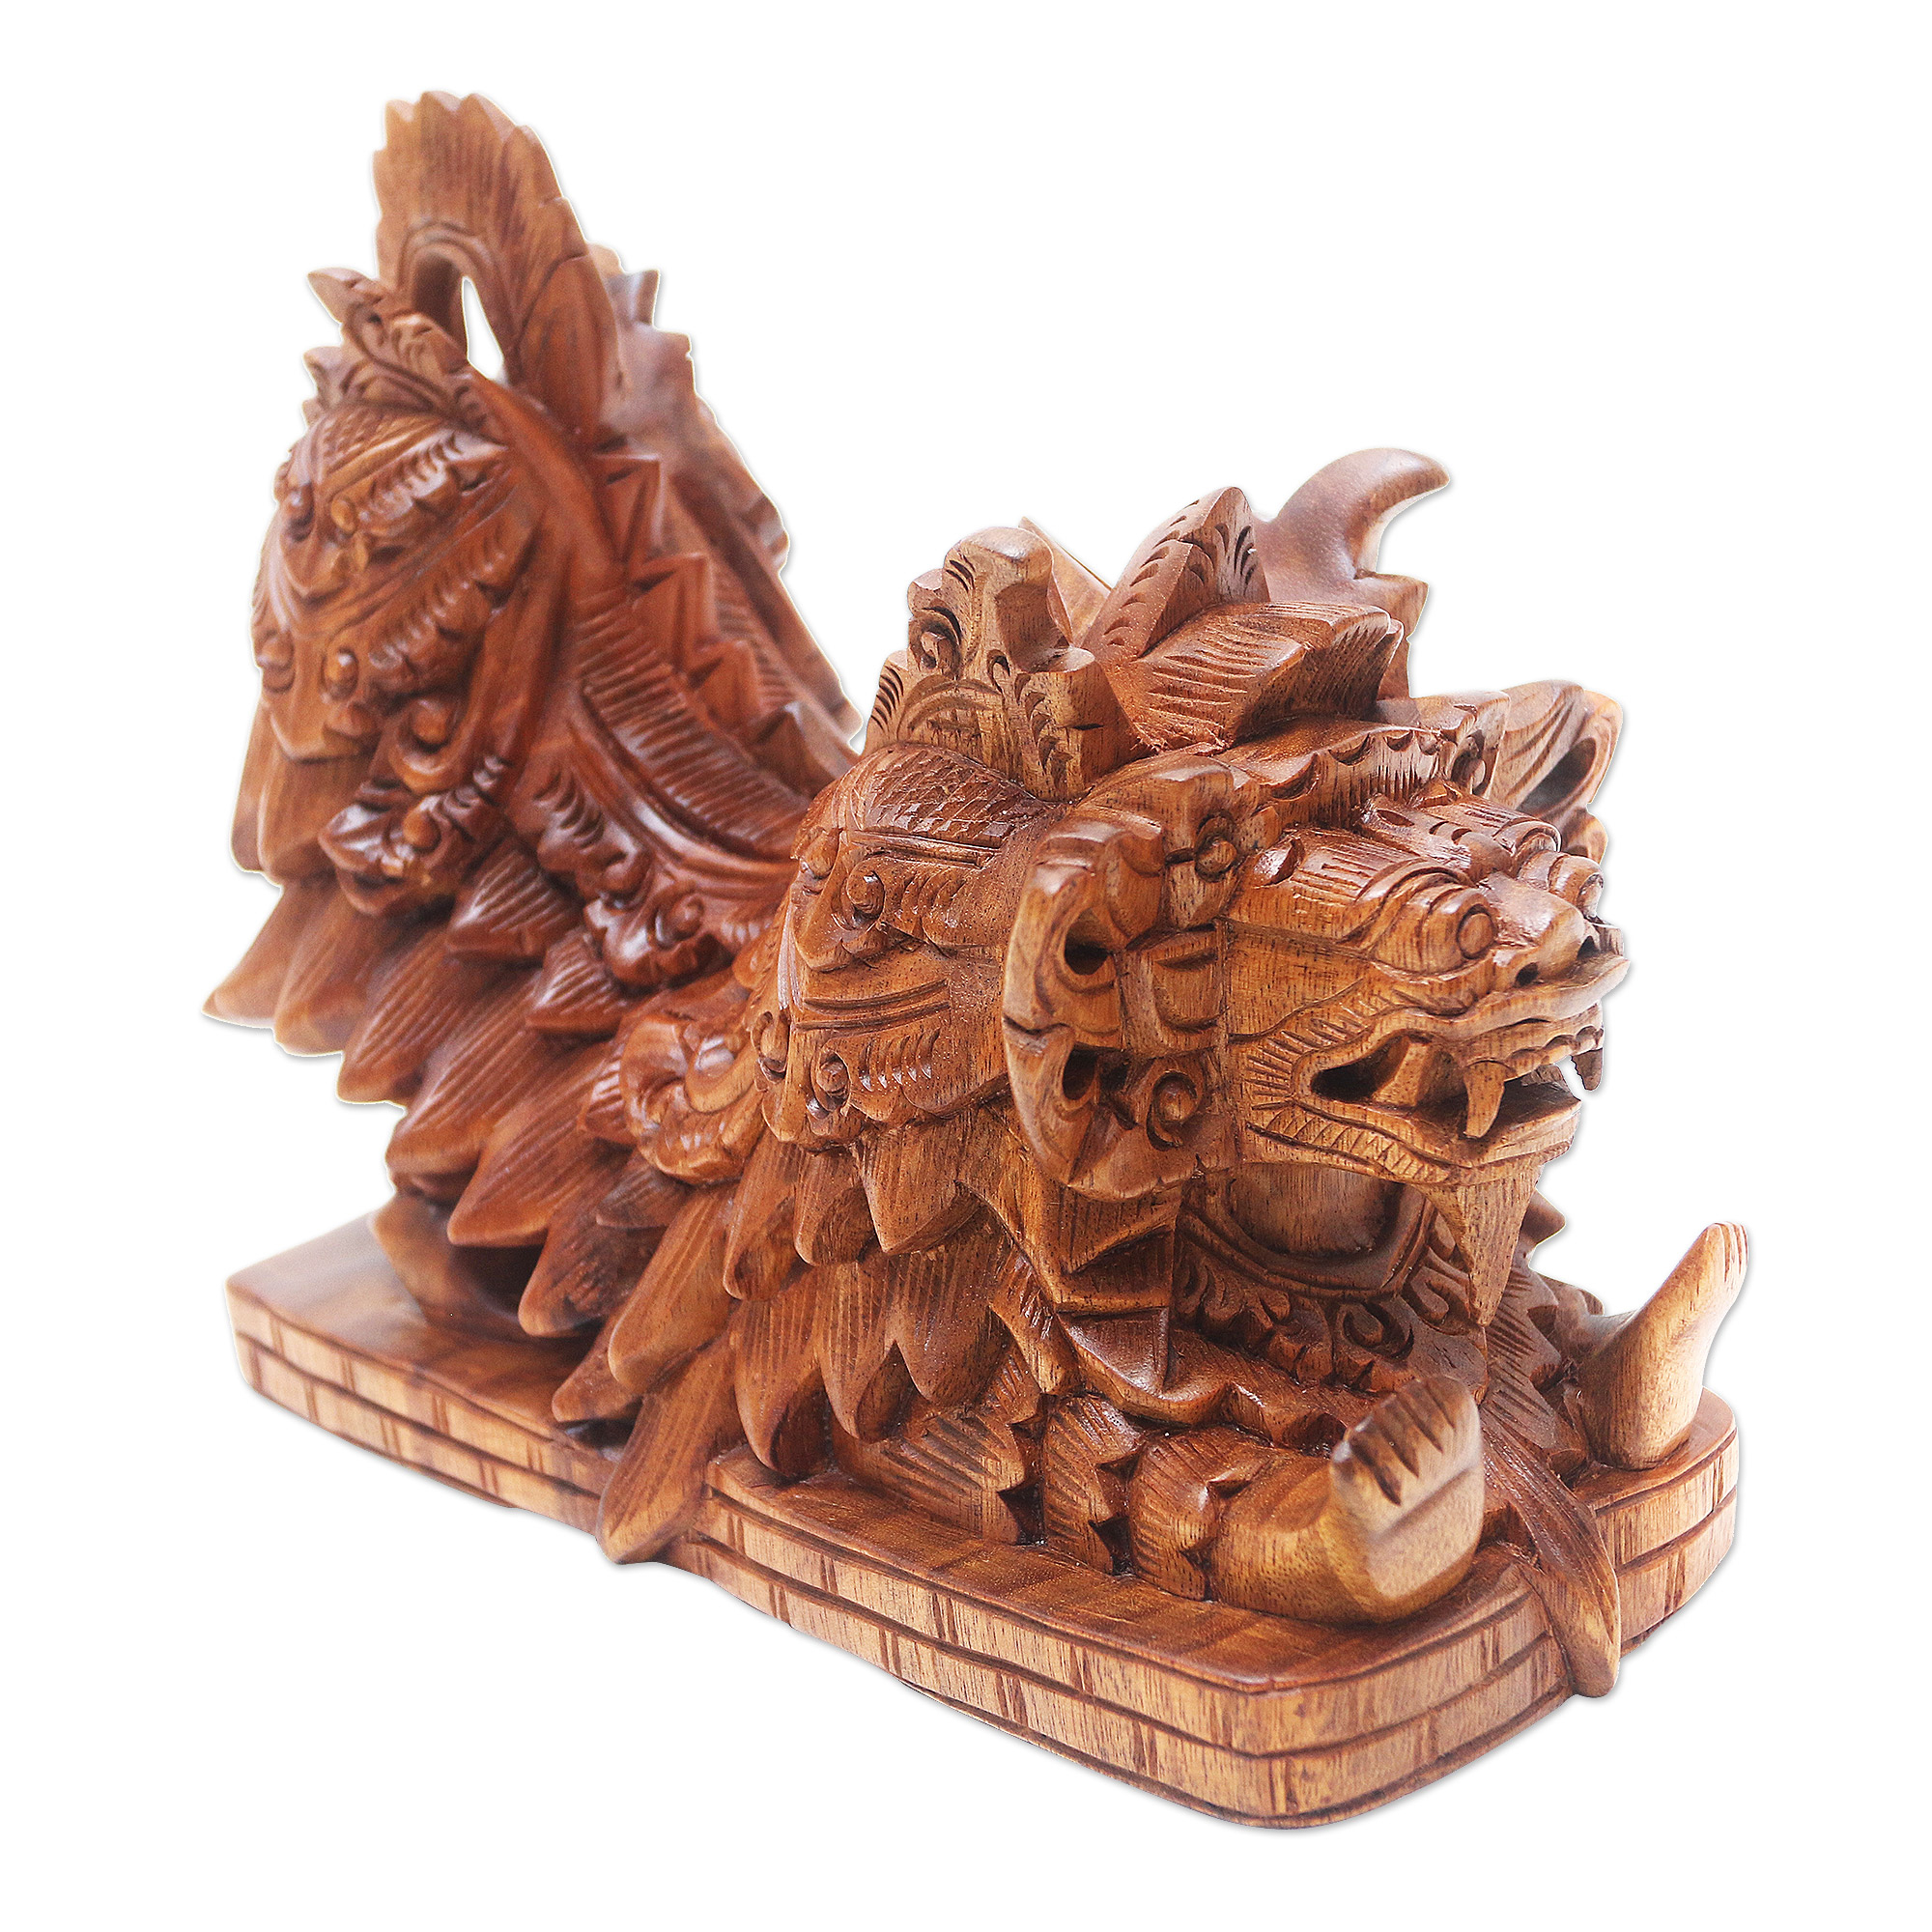 Artisan Crafted Suar Wood Barong Sculpture - Barong on Stage | NOVICA